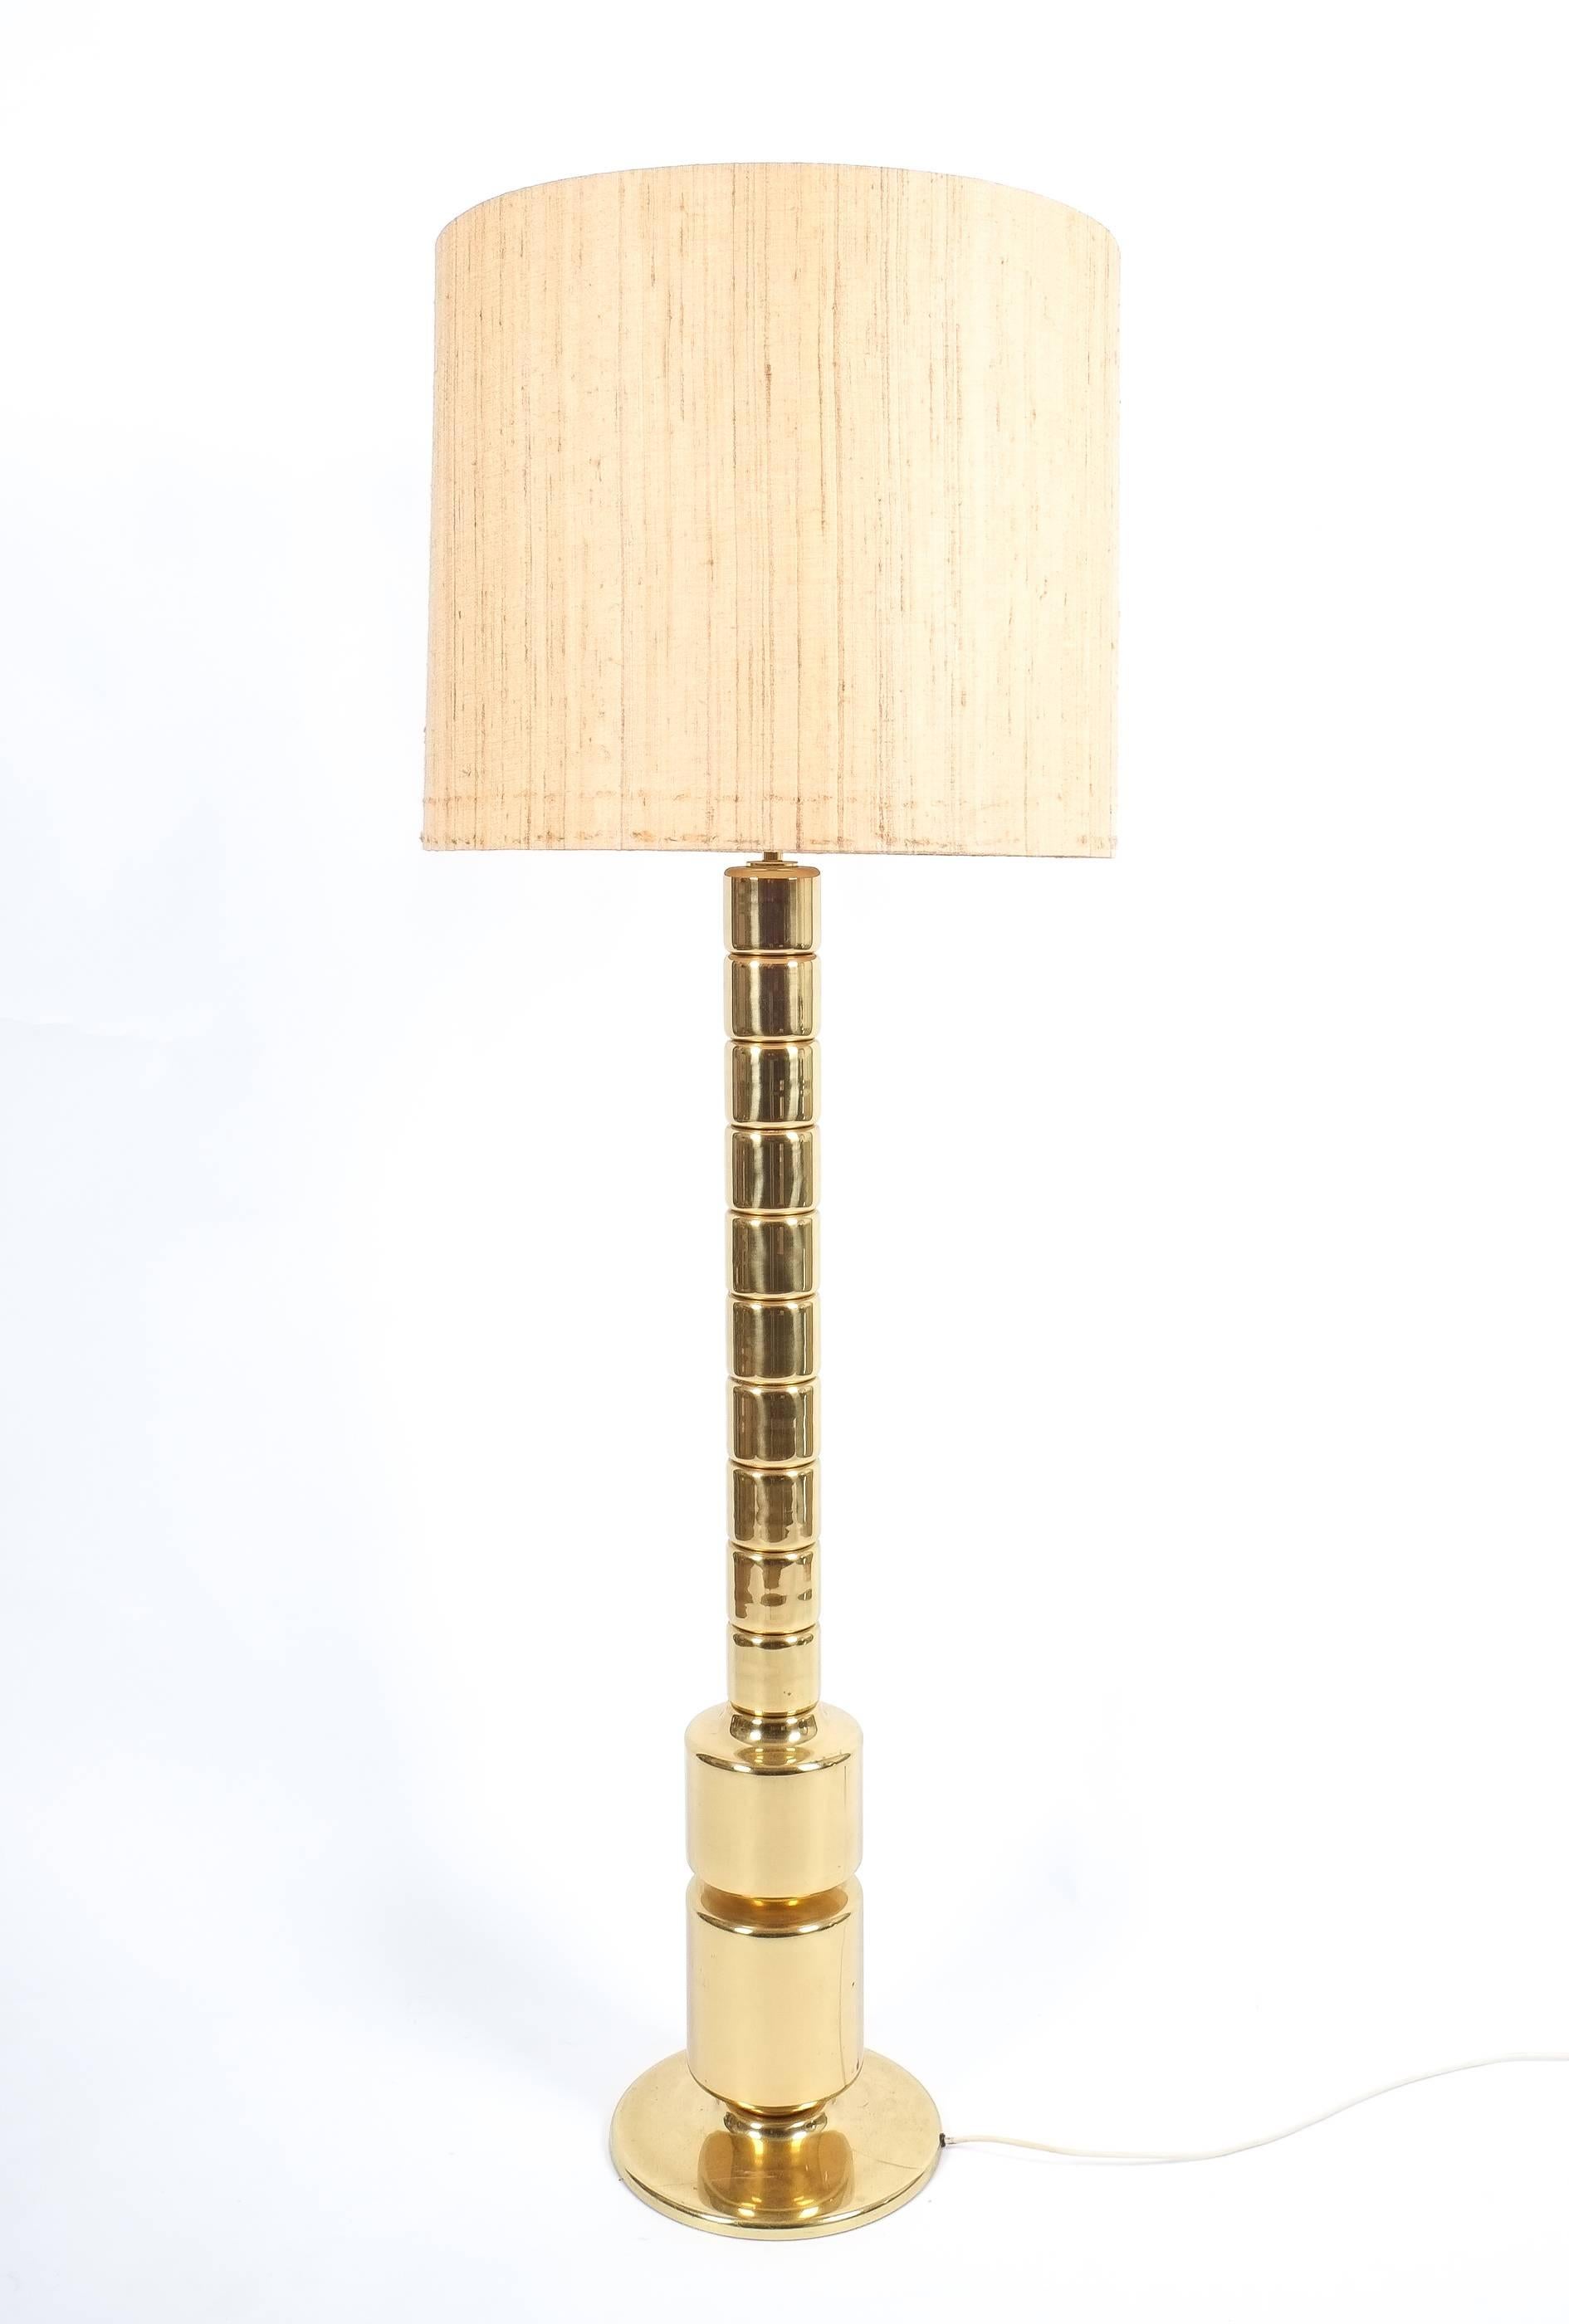 Space Age Sculptural Polished Brass Floor Lamp Germany, 1970 For Sale